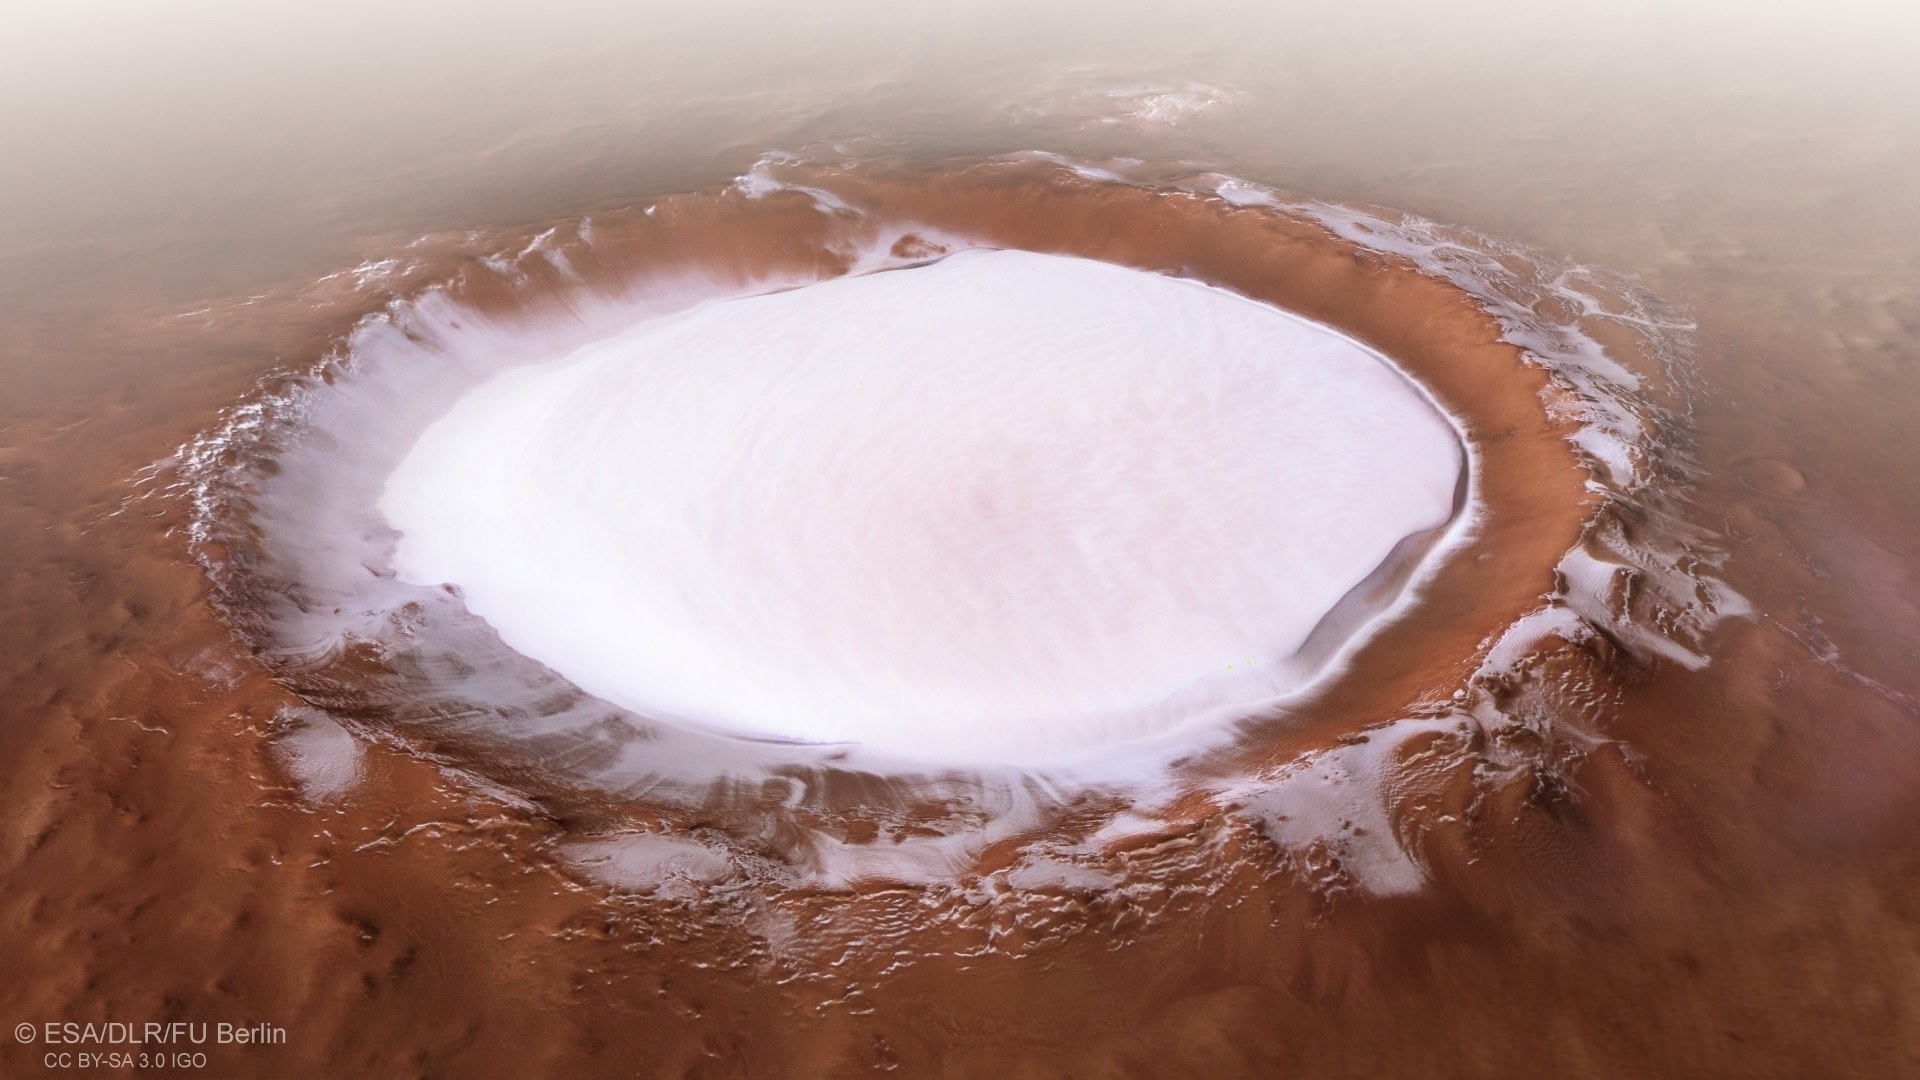 A crater on Mars